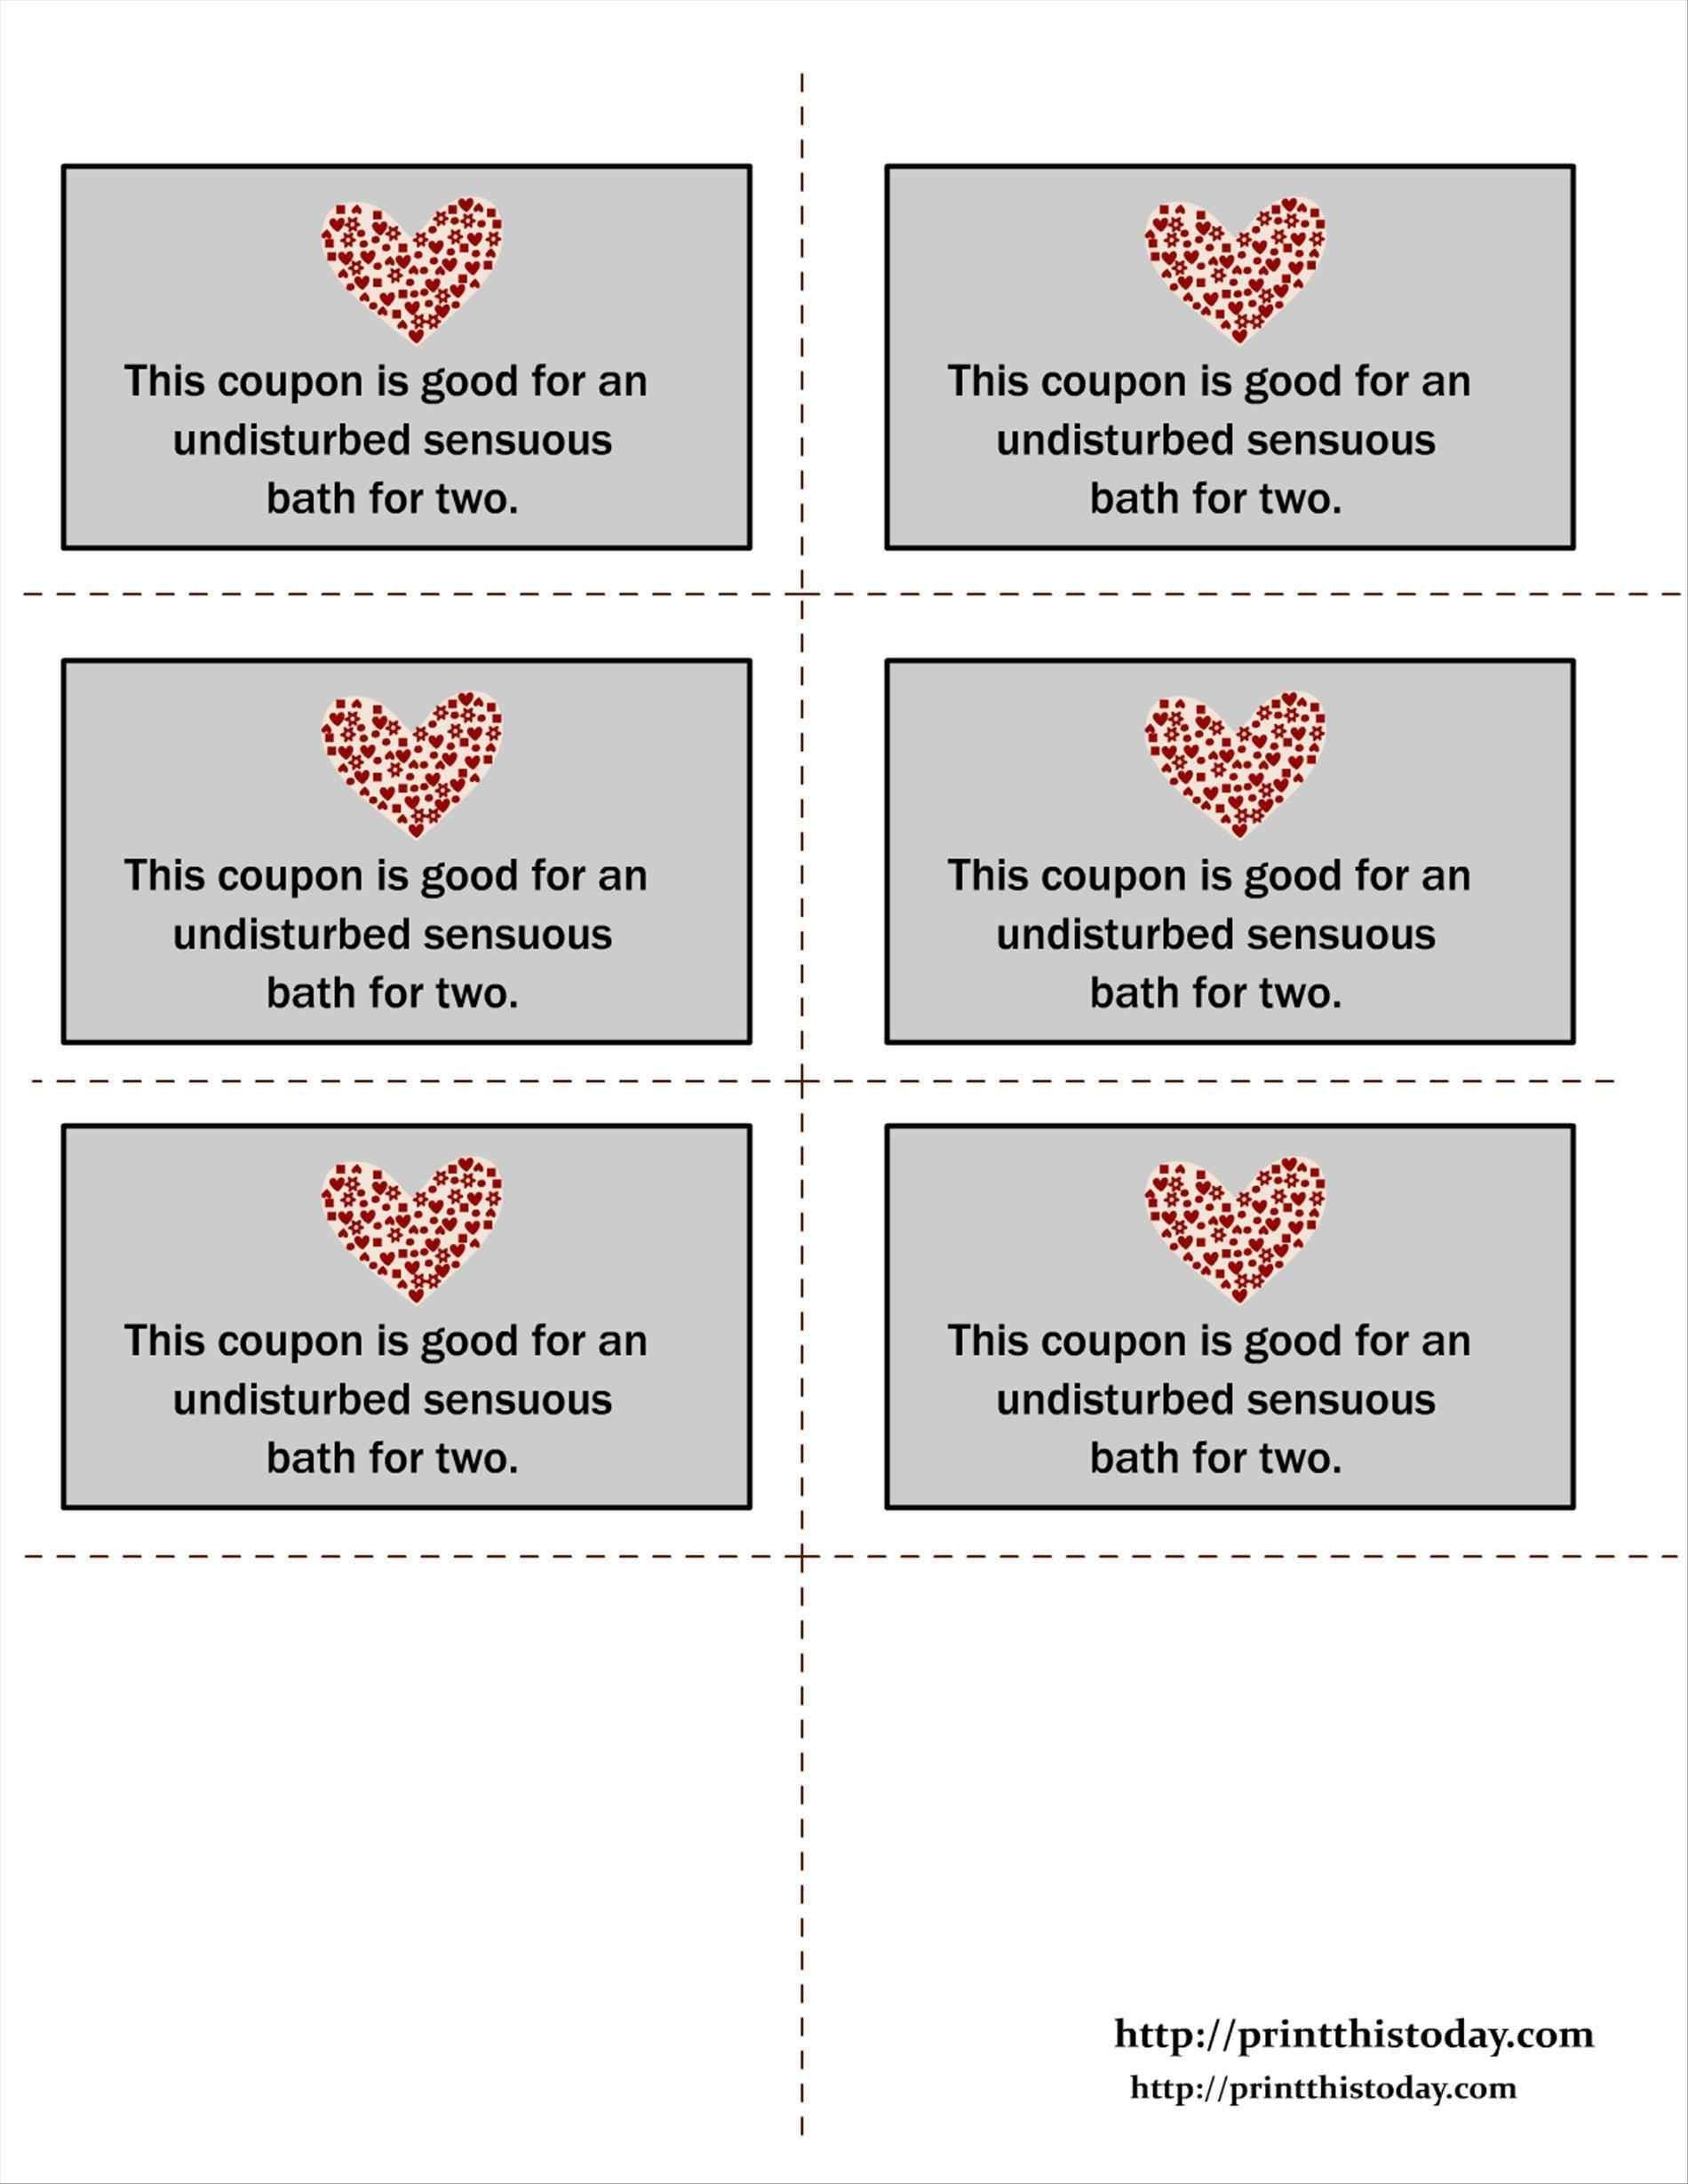 Blank Printable Love Coupons For Him | Chart And Printable World - Free Printable Love Coupons For Wife